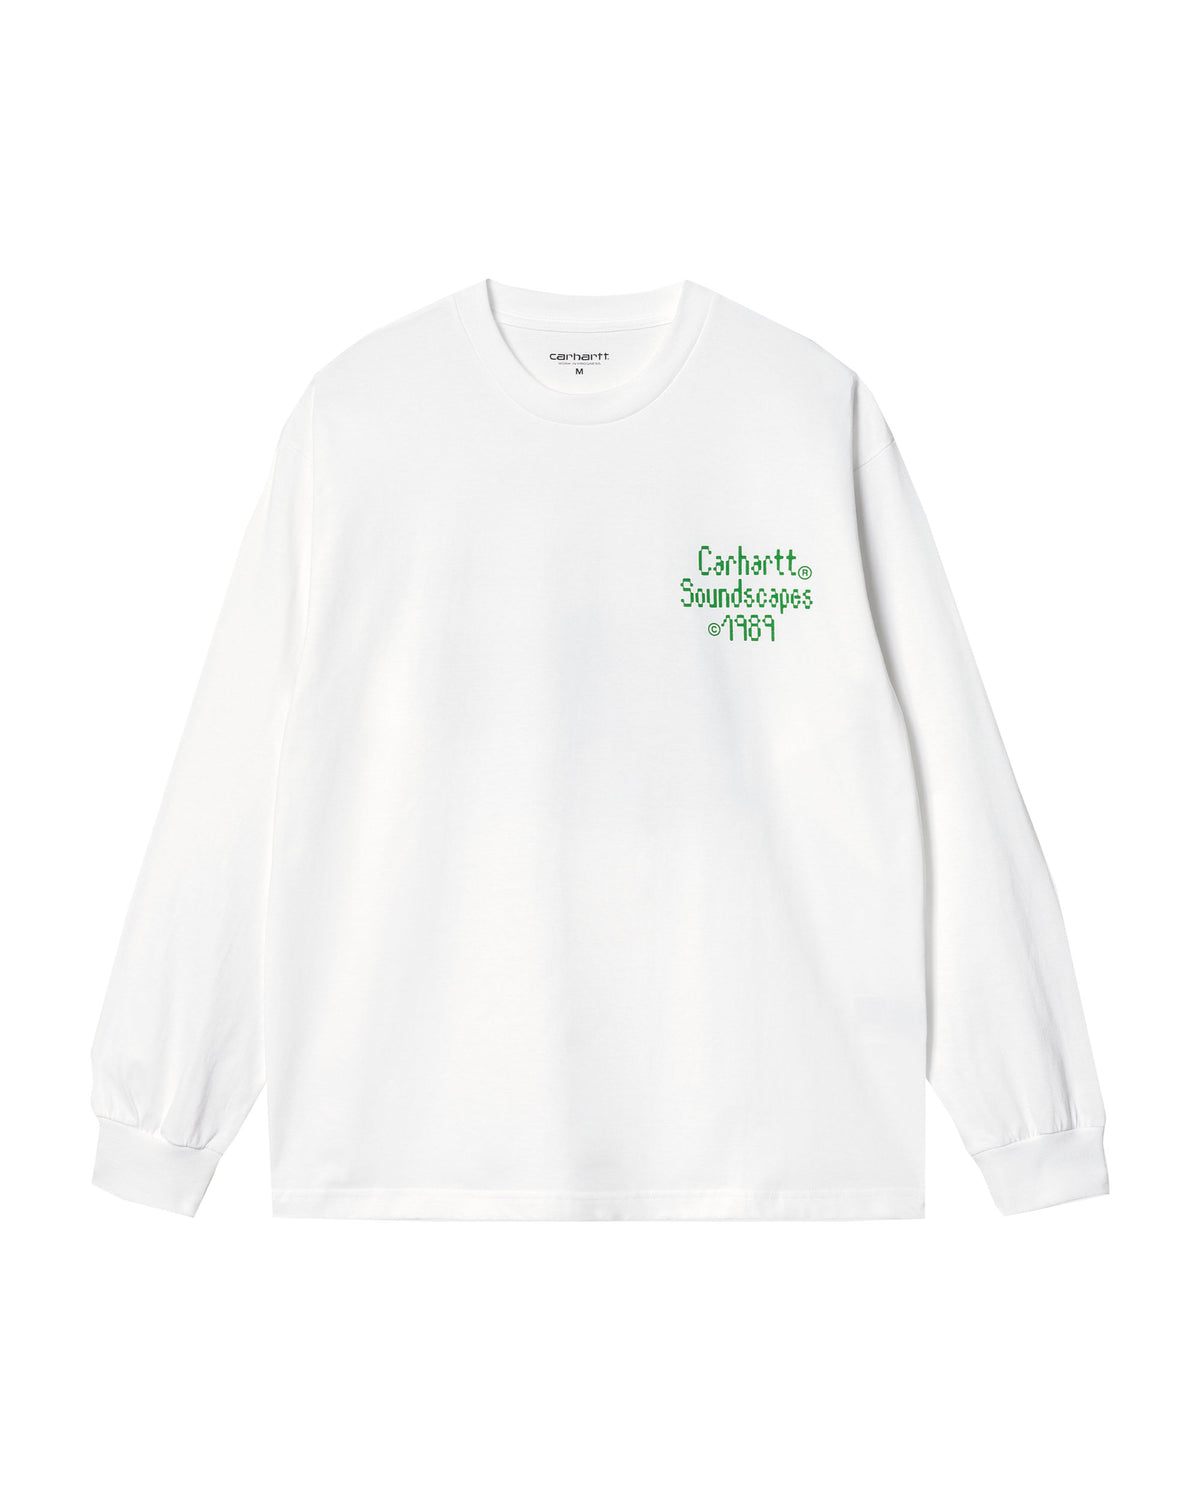 Carhartt Wip L-S Soundface Tee White